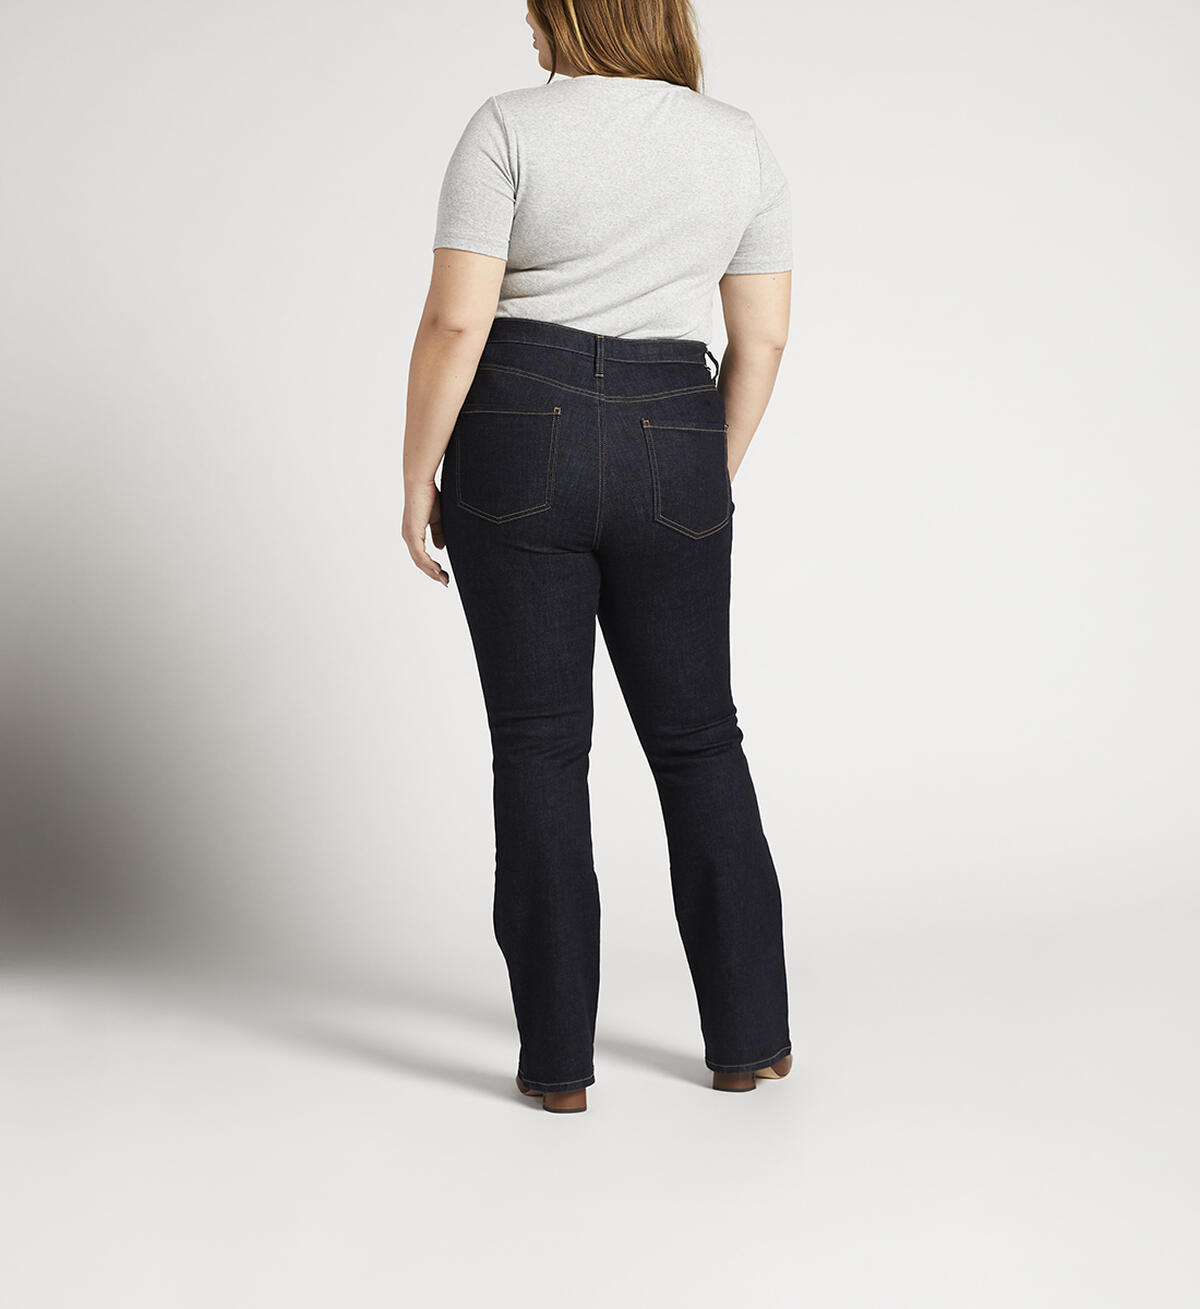 Phoebe High Rise Bootcut Jeans Plus Size, , hi-res image number 1